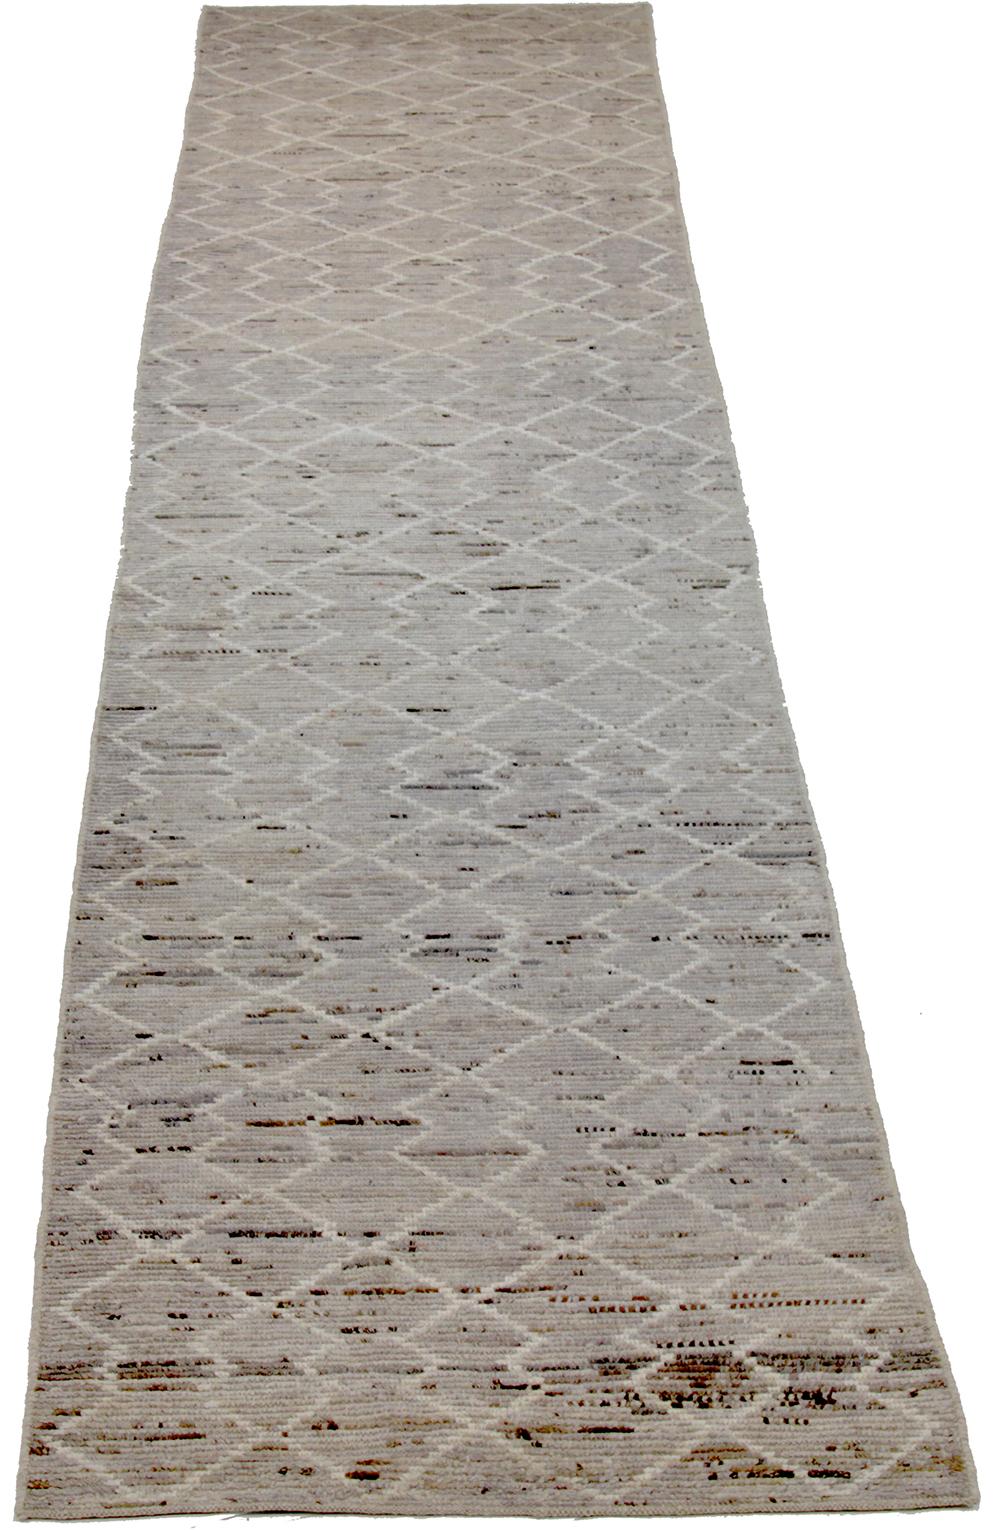 Contemporary Nazmiyal Collection Beige Tribal Modern Moroccan Style Runner Rug 3ft 4 in x 16f